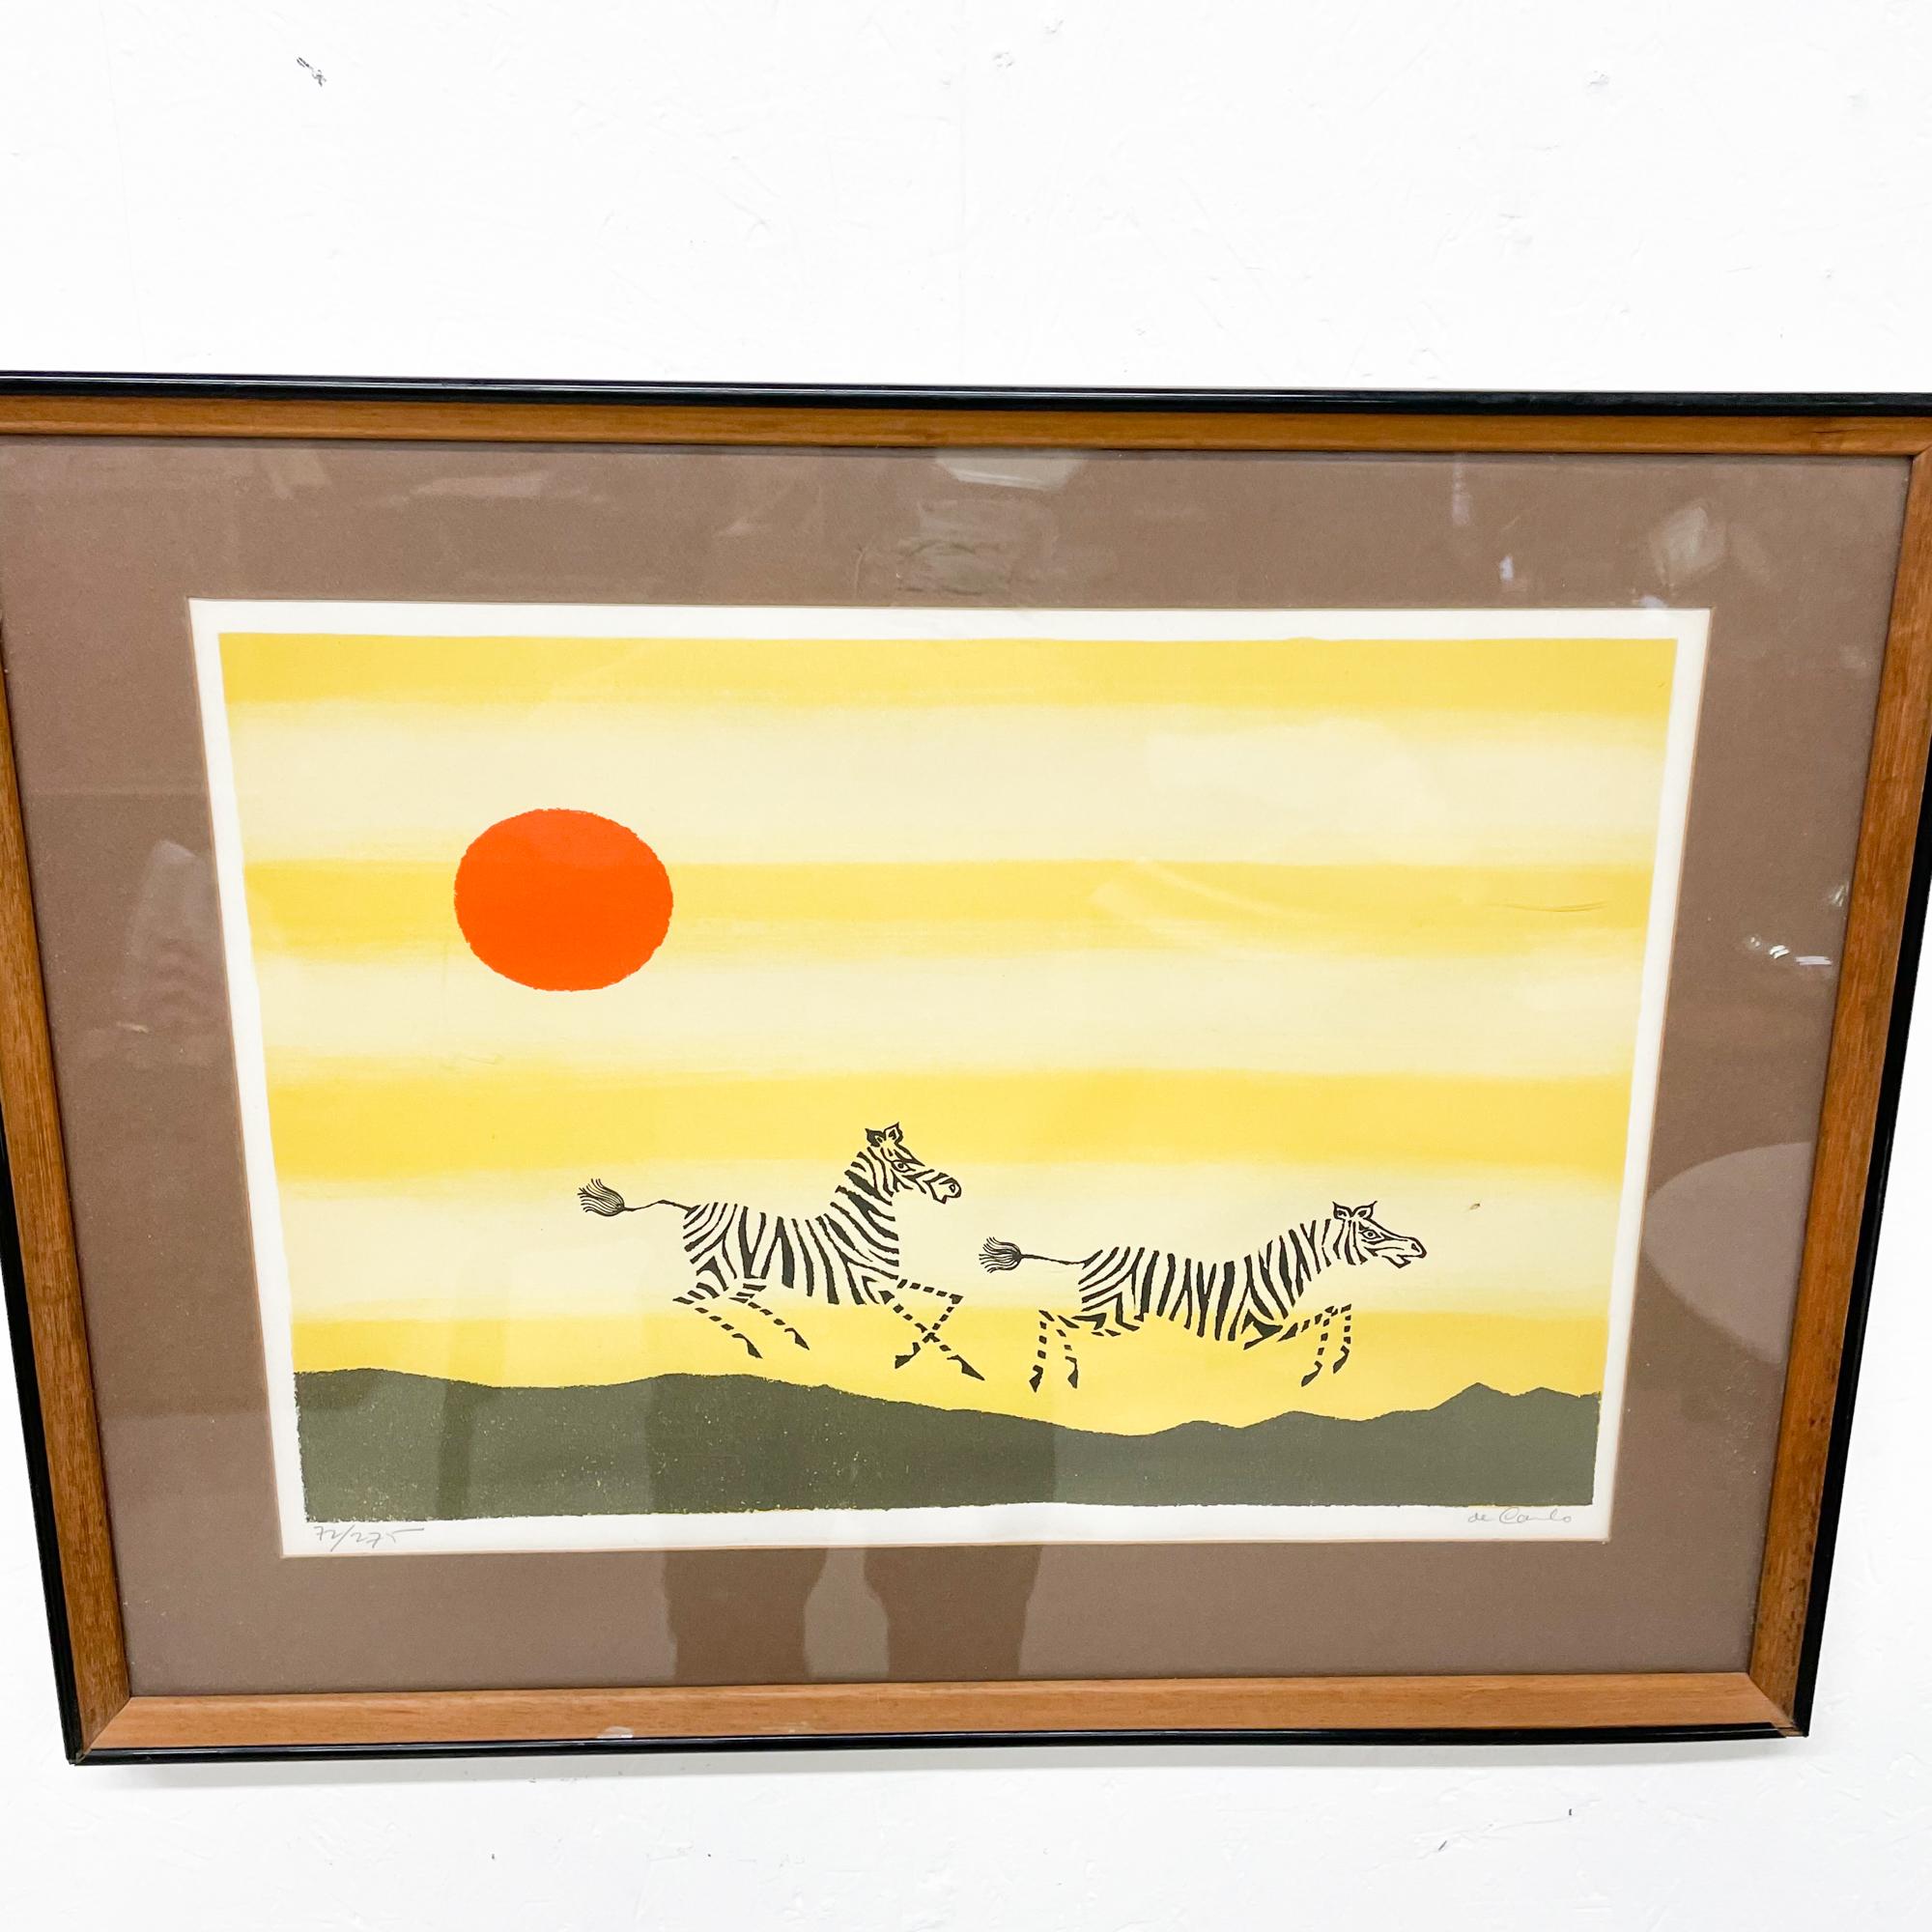 For your consideration a modern lithograph signed “ De Carlo”
Landscape with a Zebra and bright sun. Dominant color is yellow. 
Wood frame with plexiglass cover.
Original vintage unrestored. Wood frame has wear around the edge. 
Litho in good